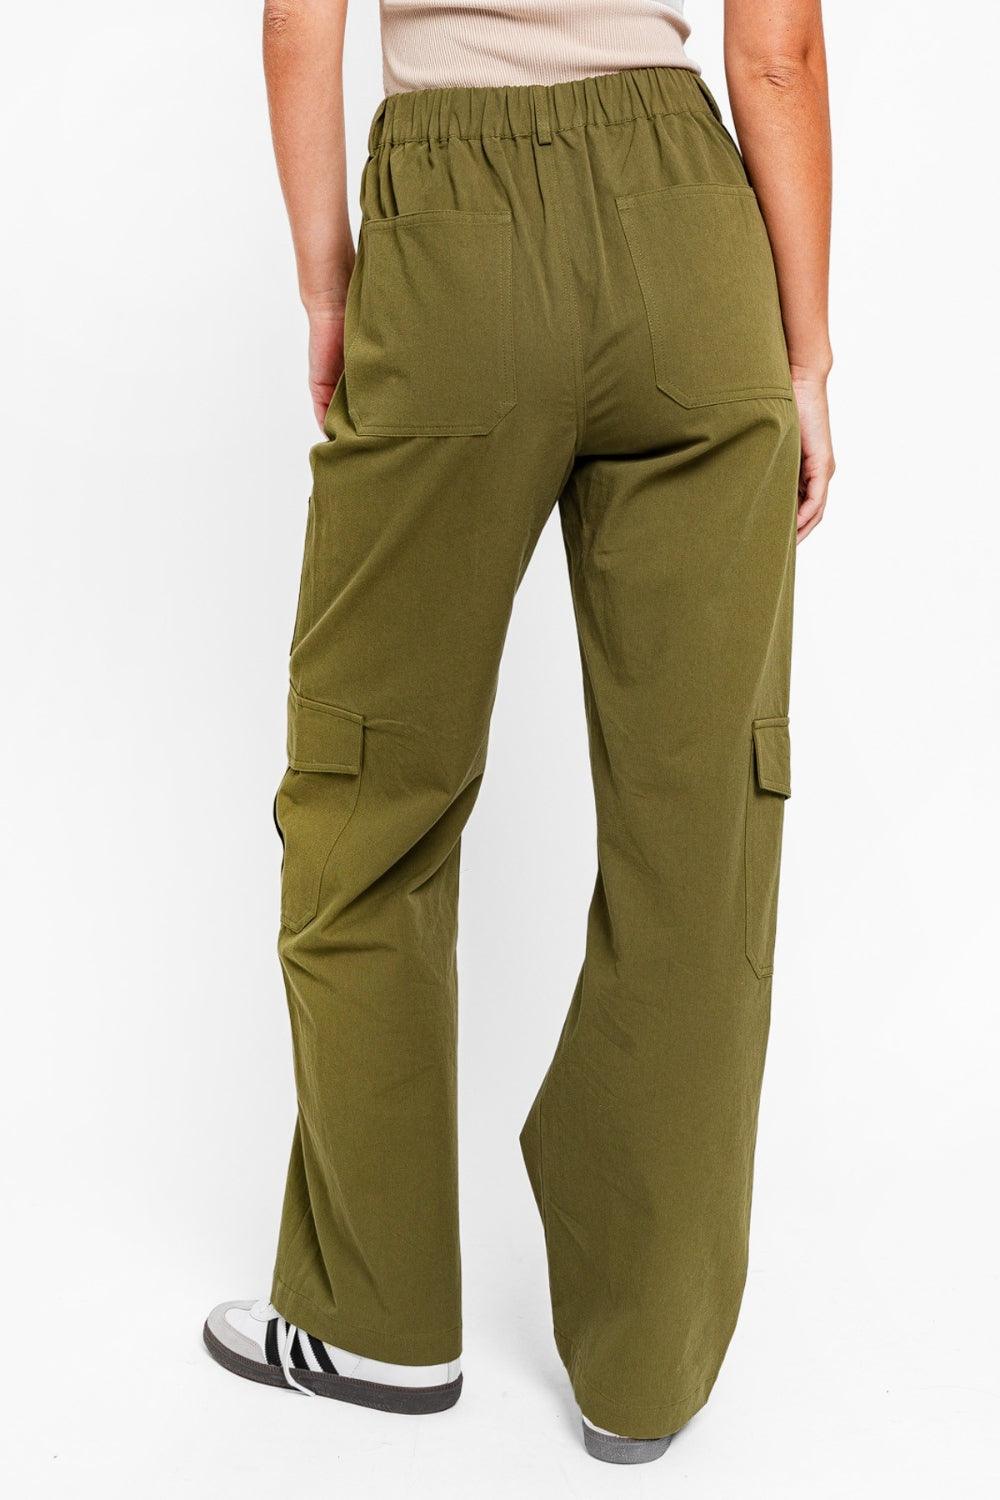 High Waisted Wide Leg Cargo Pants with Pockets - Wildflower Hippies